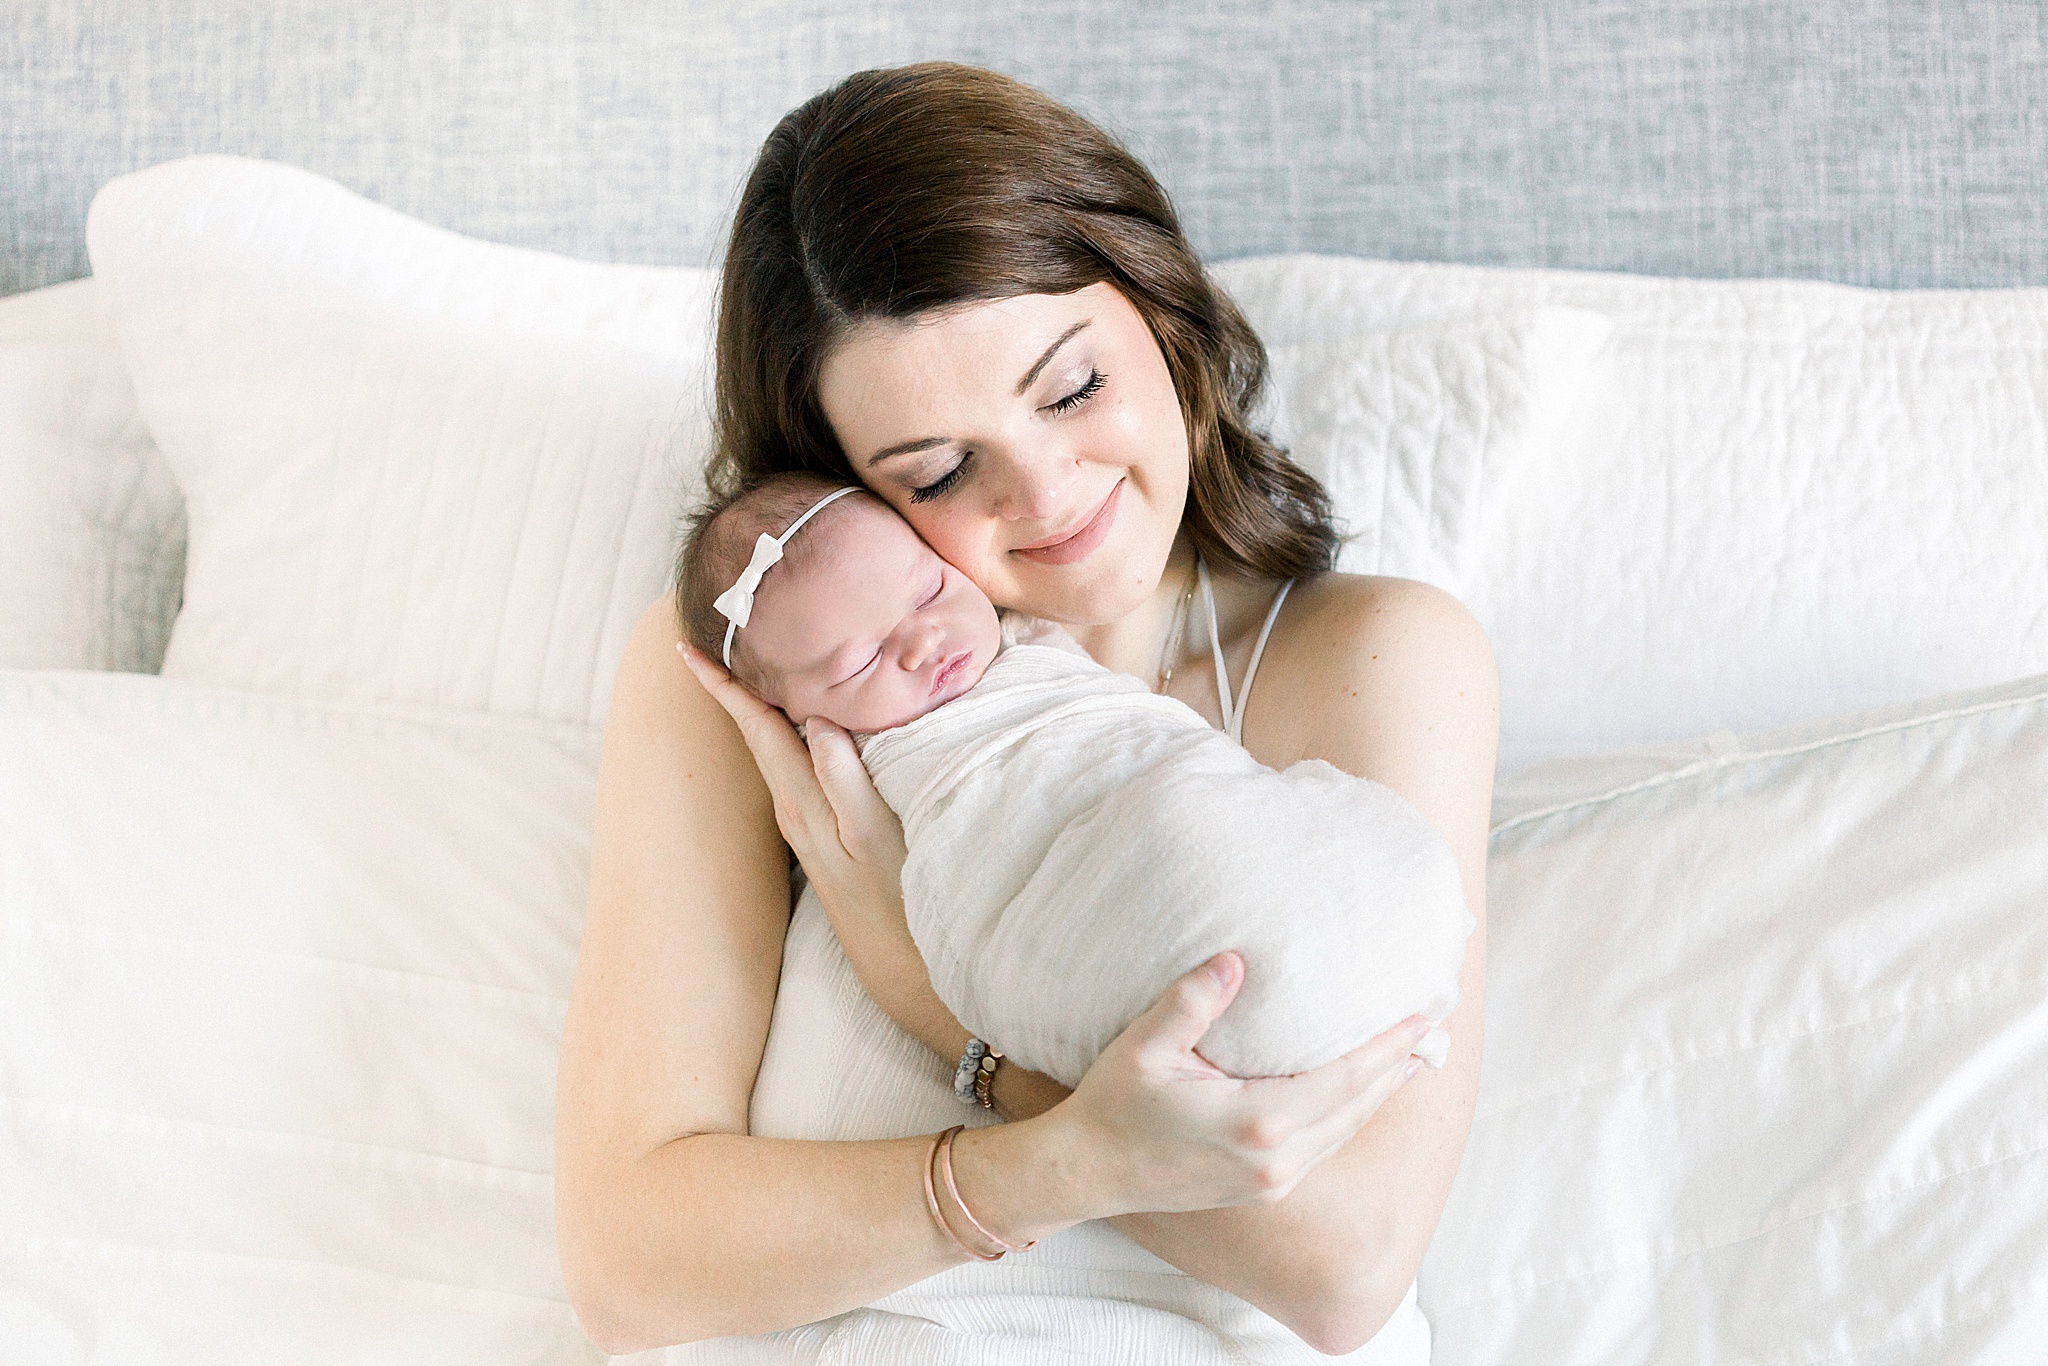 Aly-Kirk-Photo-Blakely-Reese-Baby-Girl-Newborn-Mother-Daughter